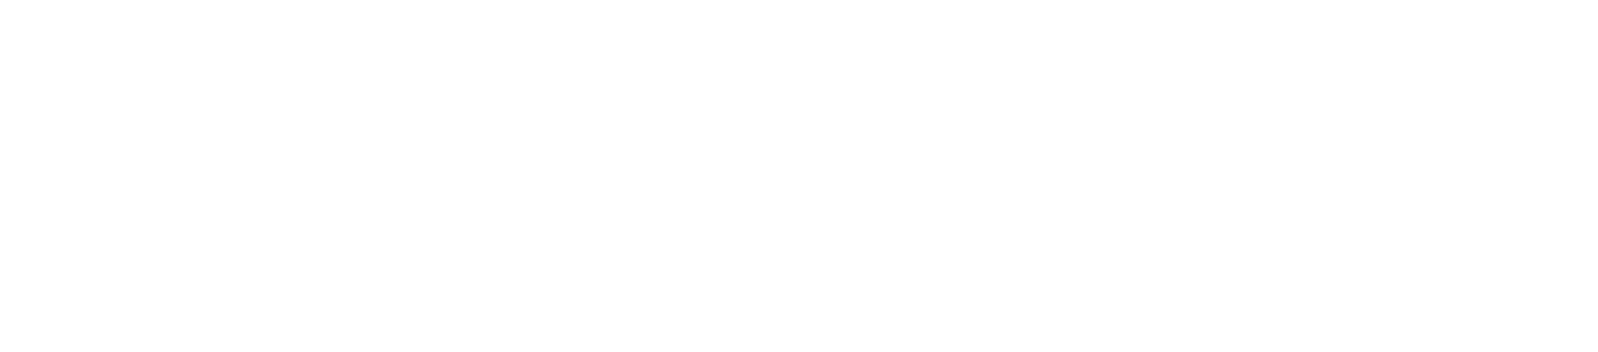 Old Mutual logo large for dark backgrounds (transparent PNG)